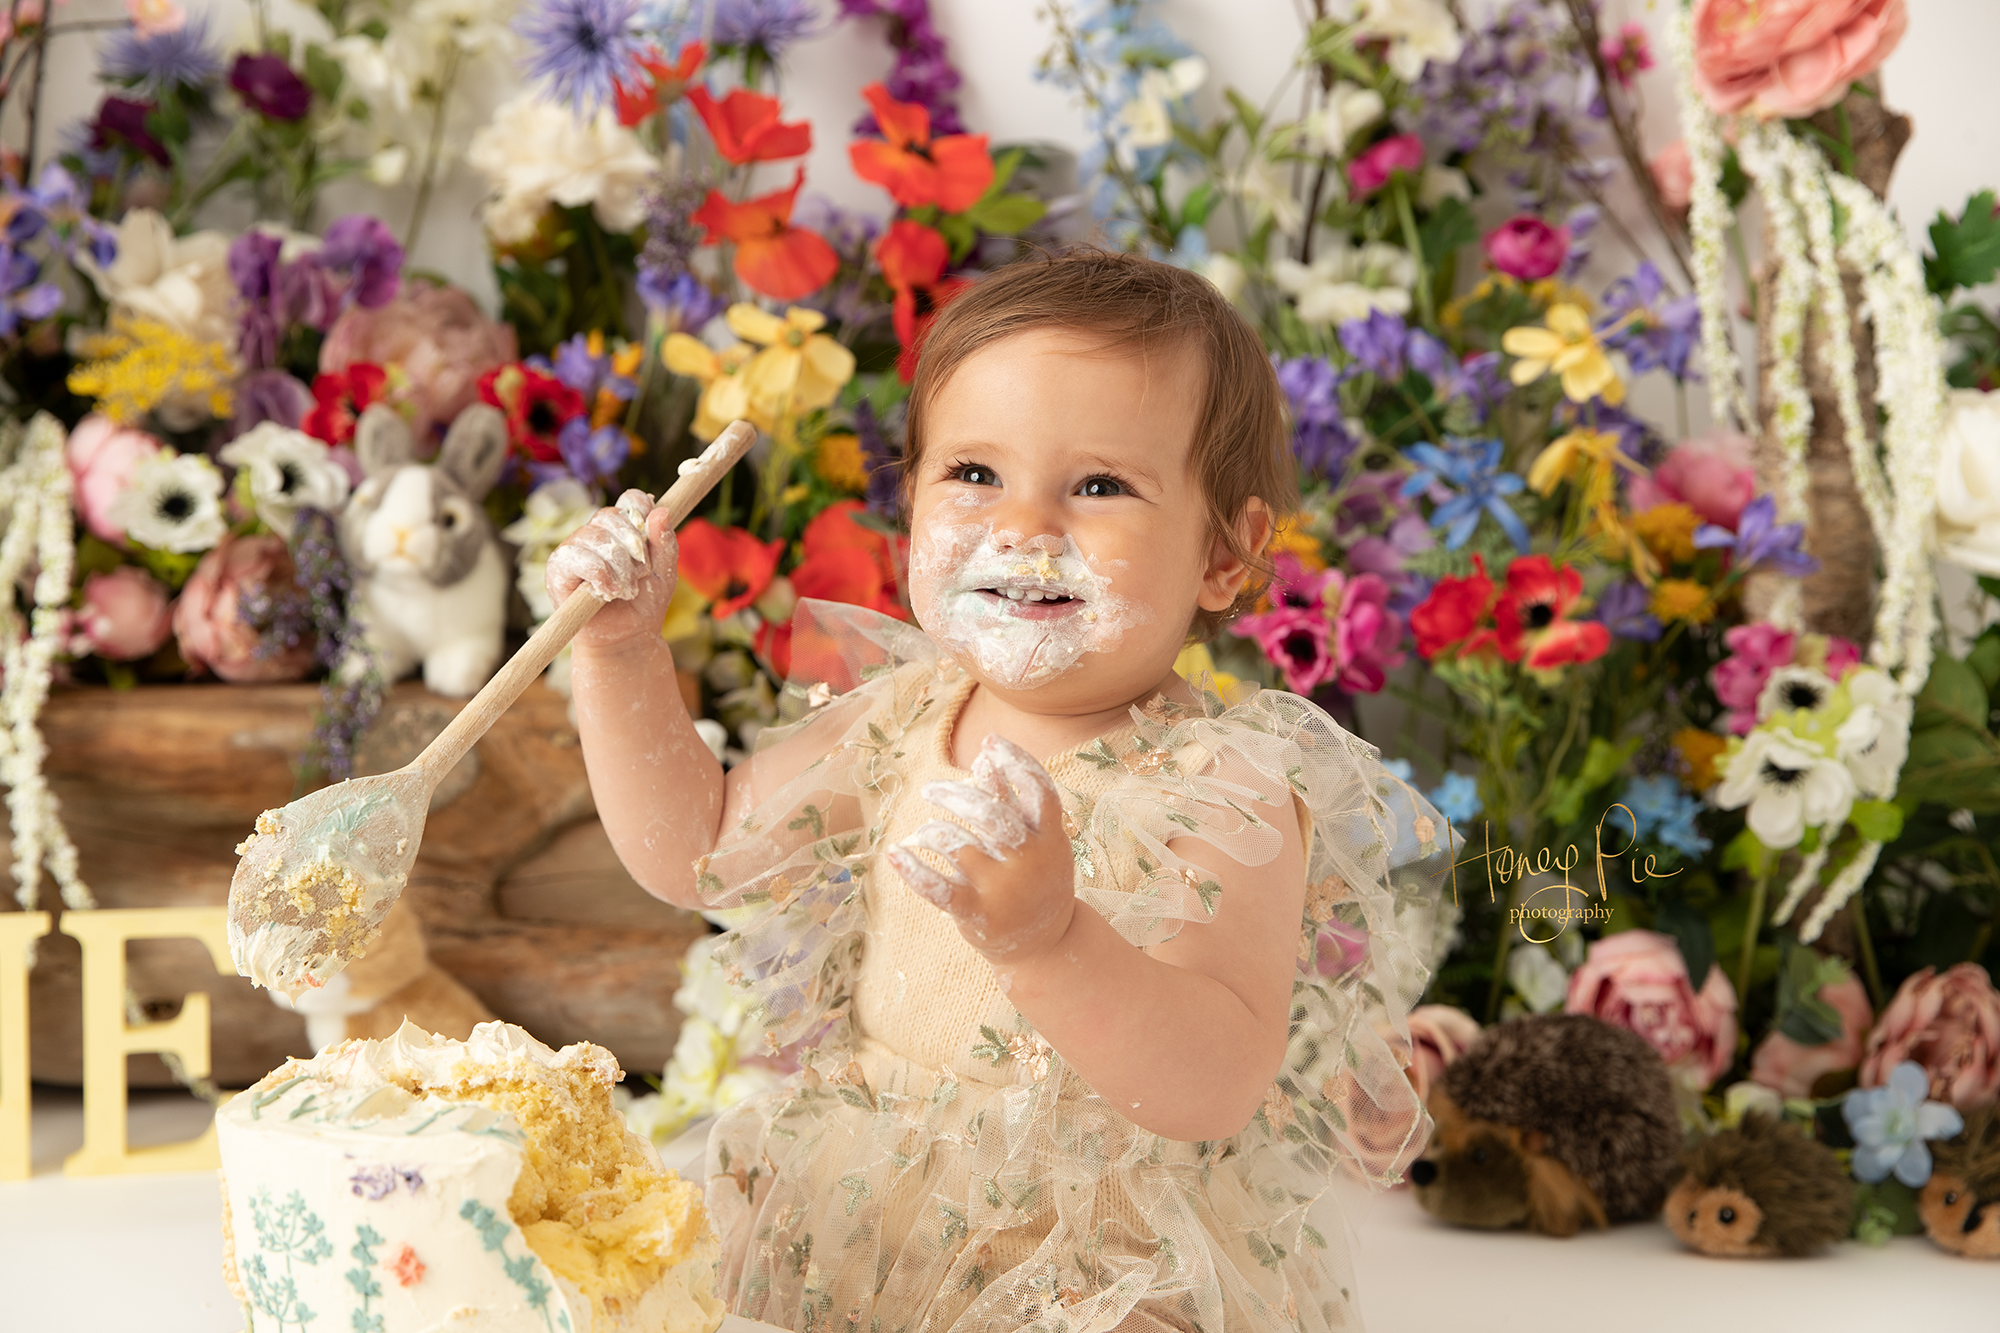 A smiling baby girl with cake all around her mouth & face during her 1st birthday cake smash photoshoot in sussex